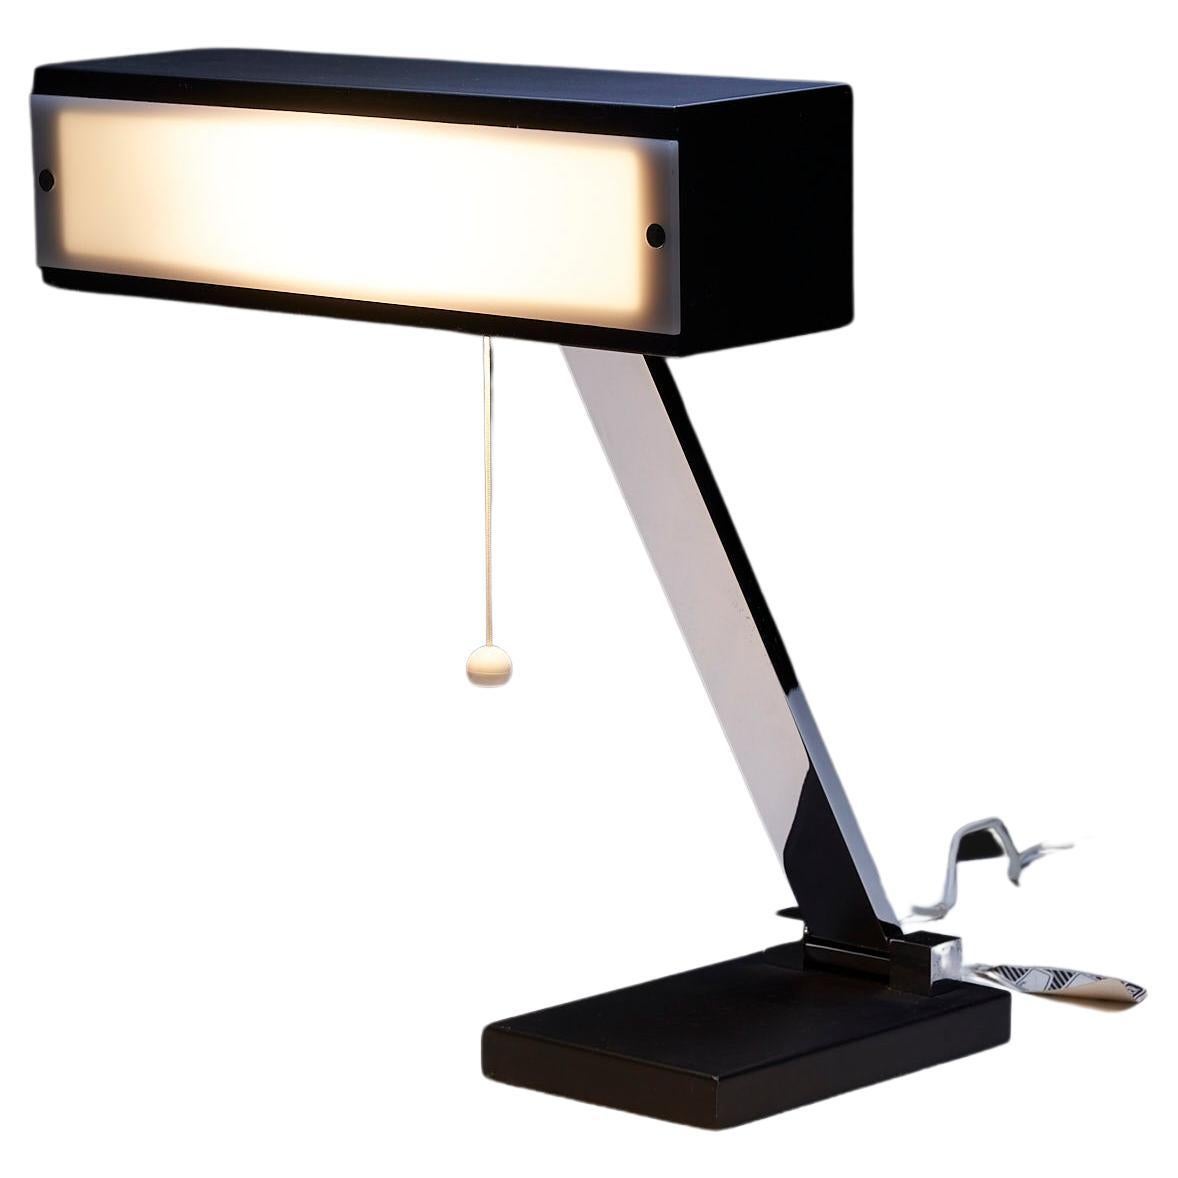 Well-built Table Lamp by Boulanger For Sale